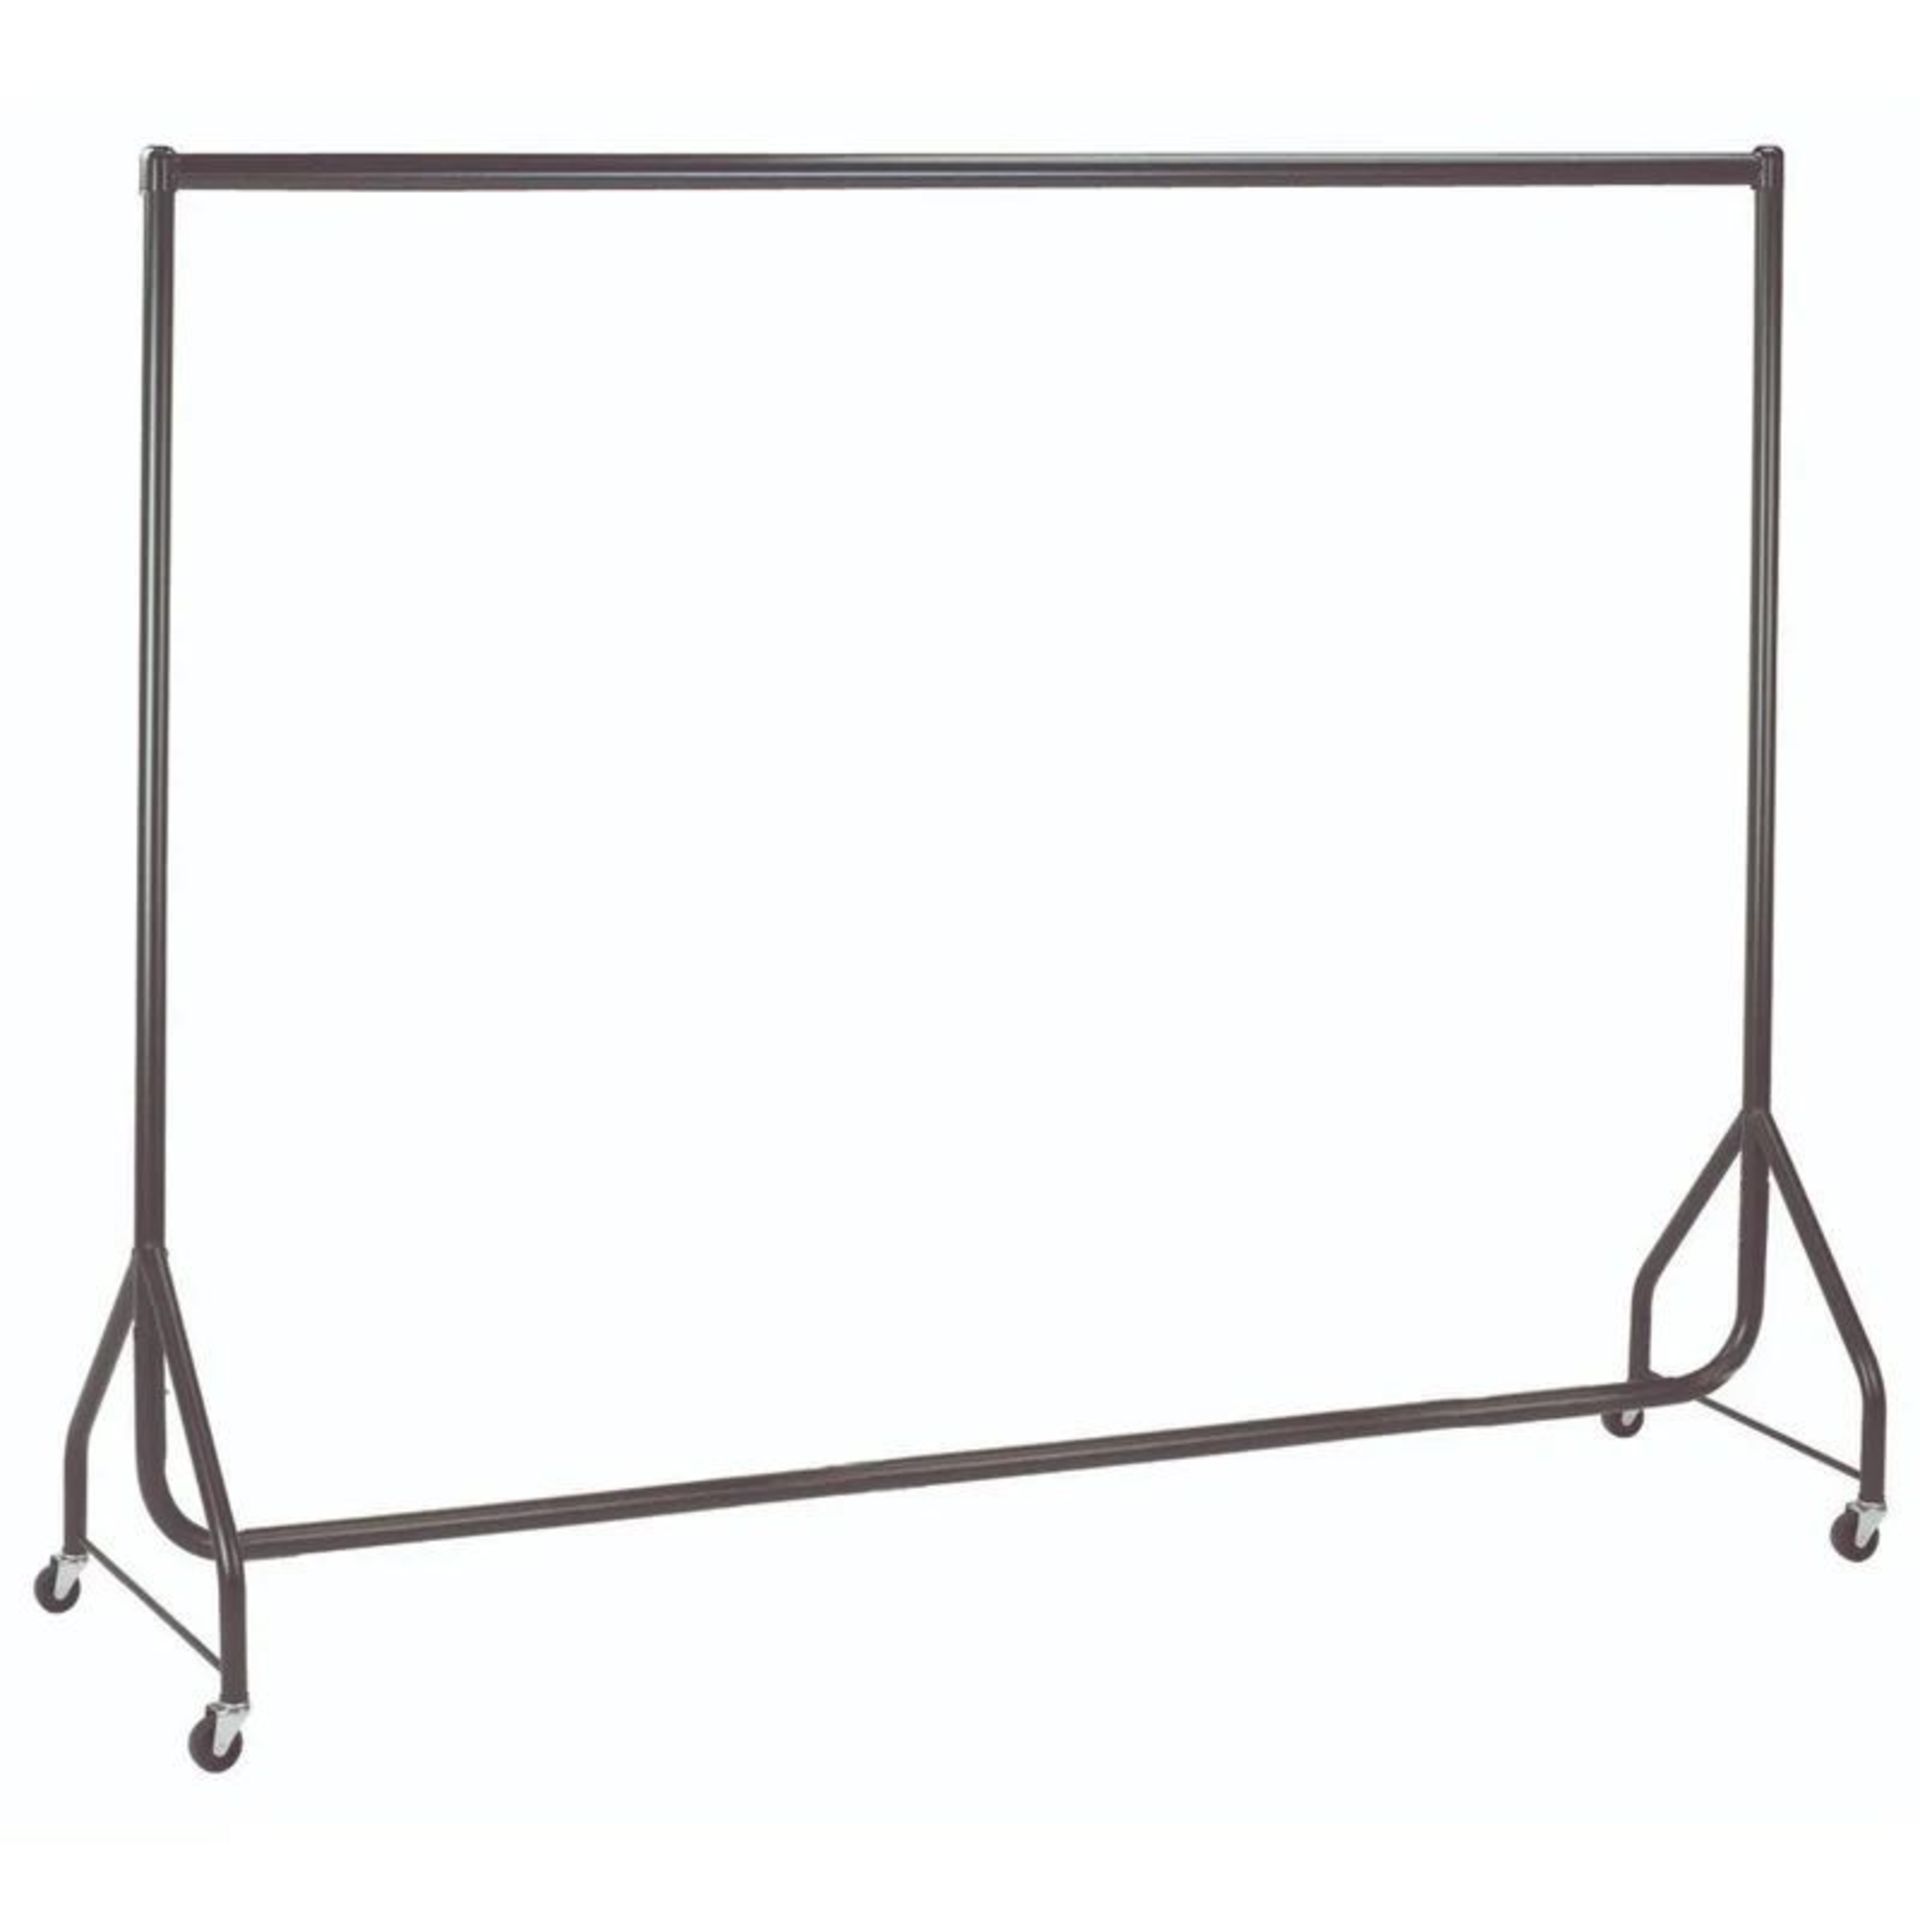 180cm Rolling Clothes Racks. - R13a.7. RRP £159.99. This rail is in a black, hard-wearing powder- - Image 2 of 2